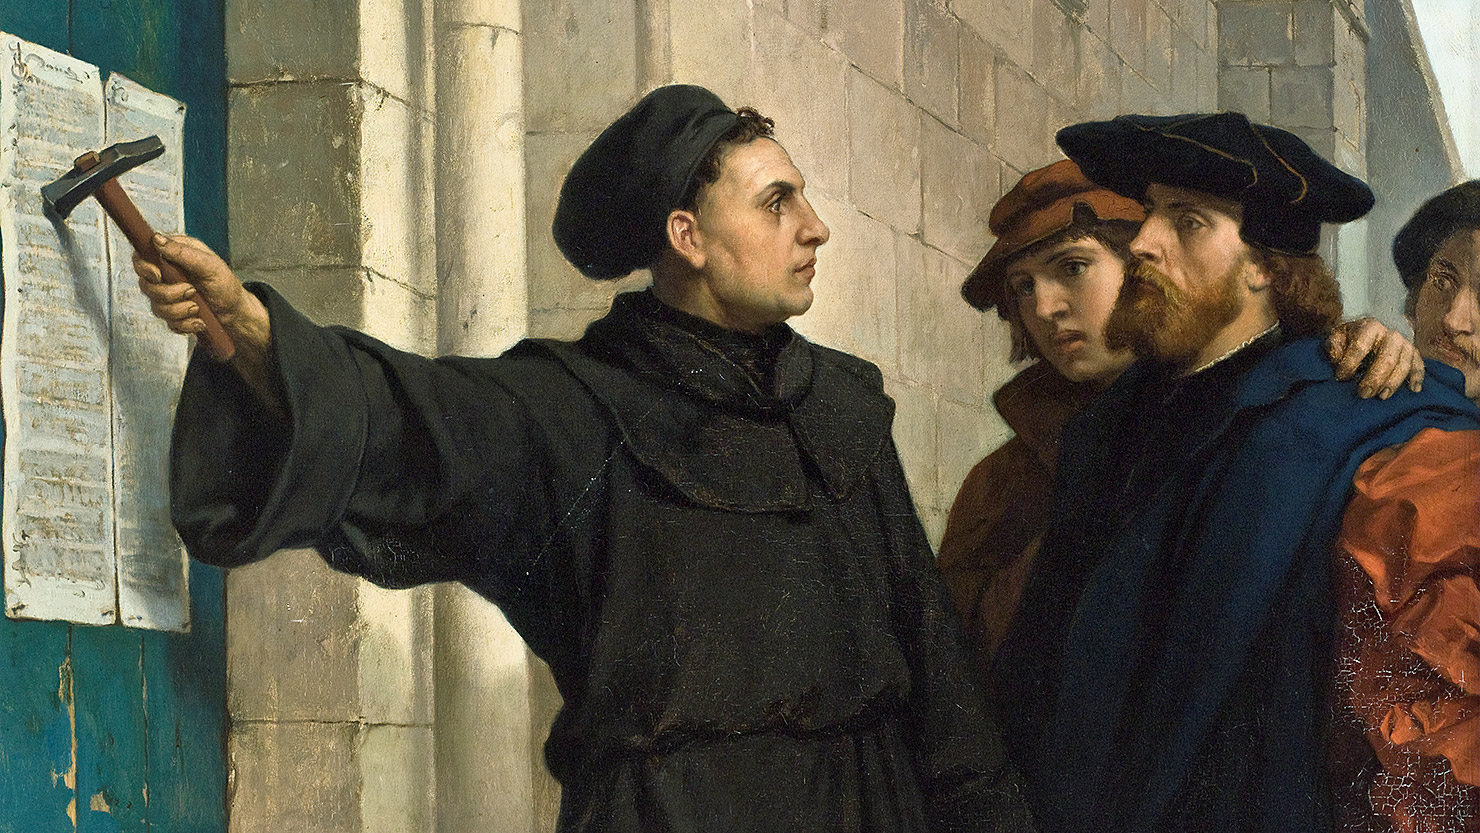 luther95theses2